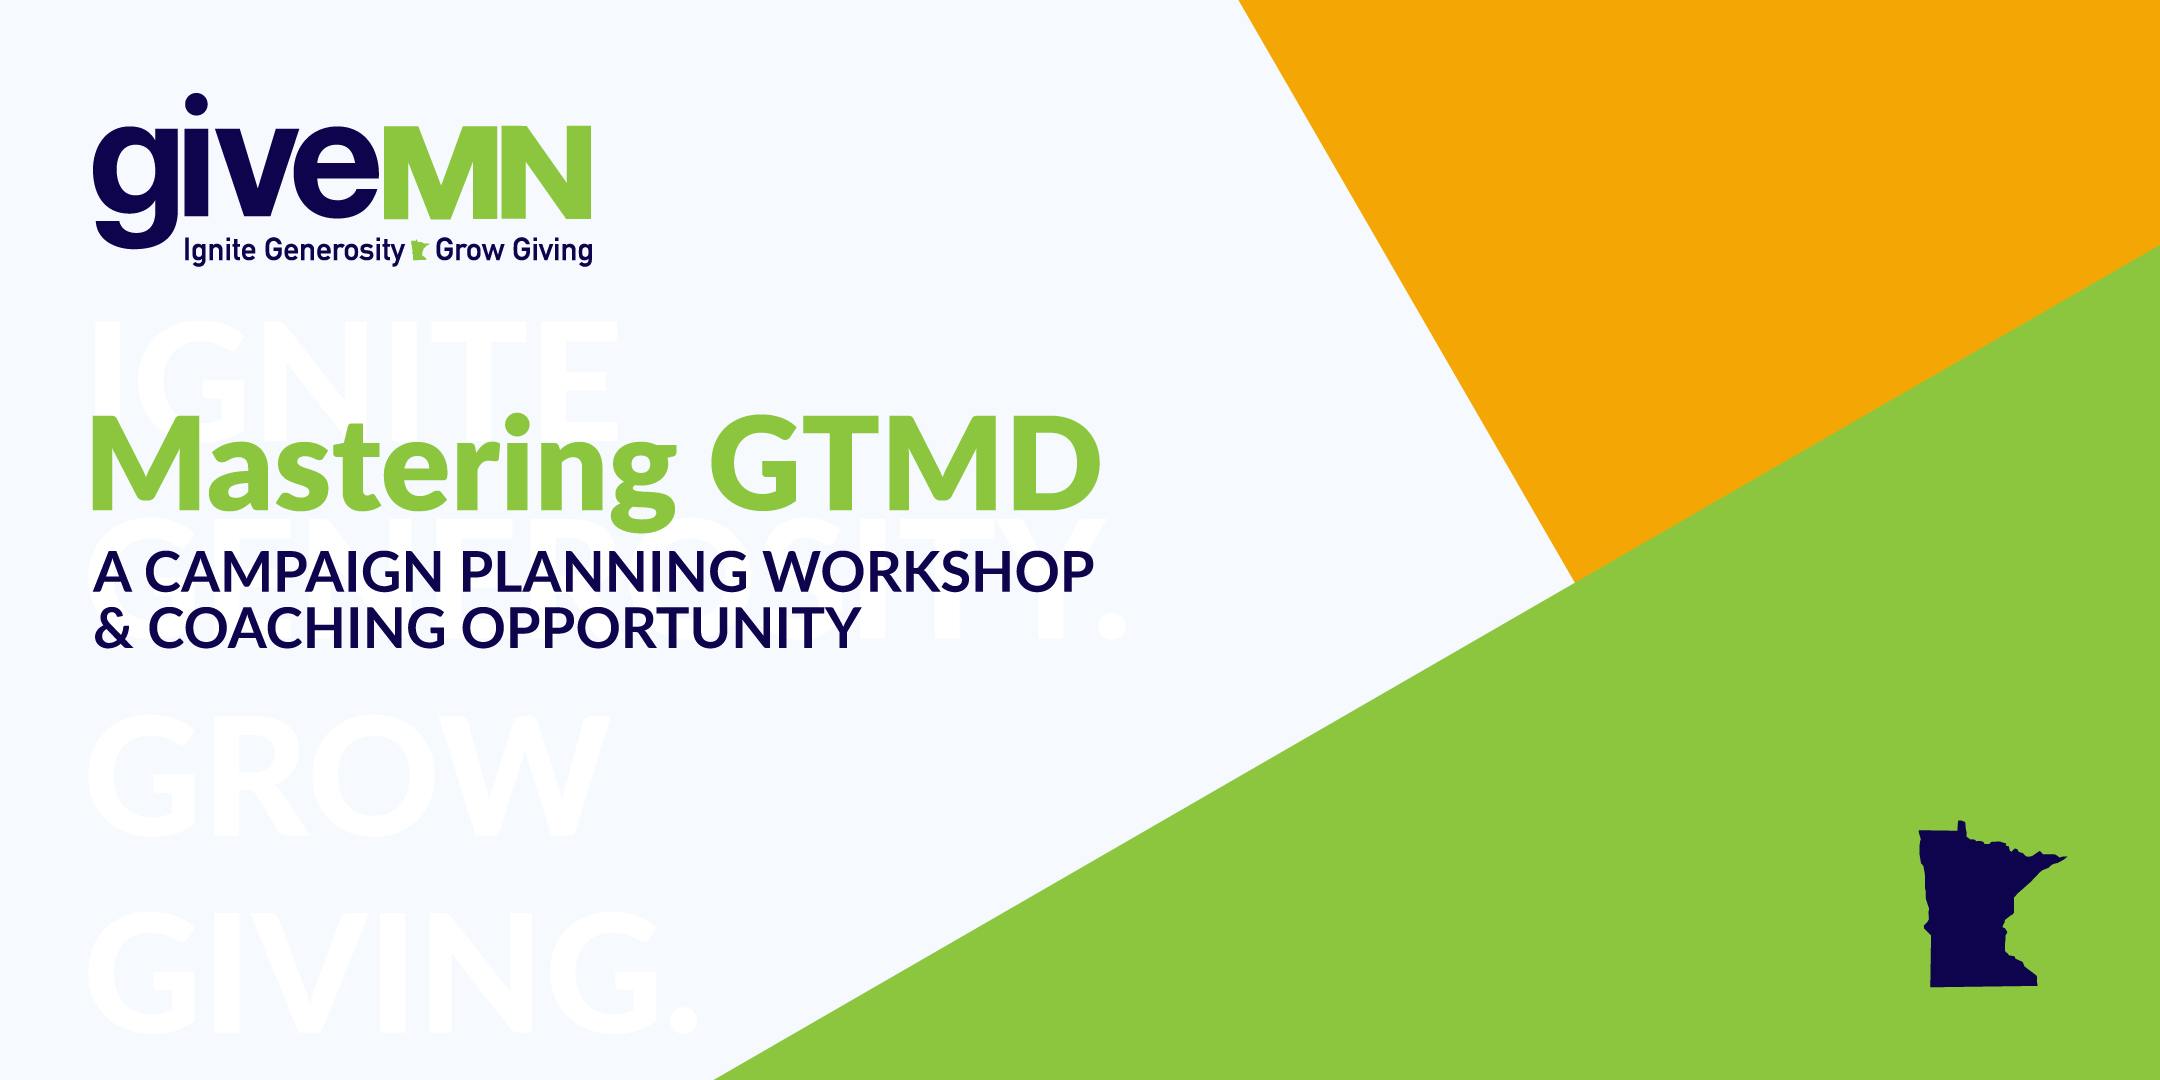 EVENING | Roseville Area | Mastering GTMD: Campaign Planning Workshop & Coaching